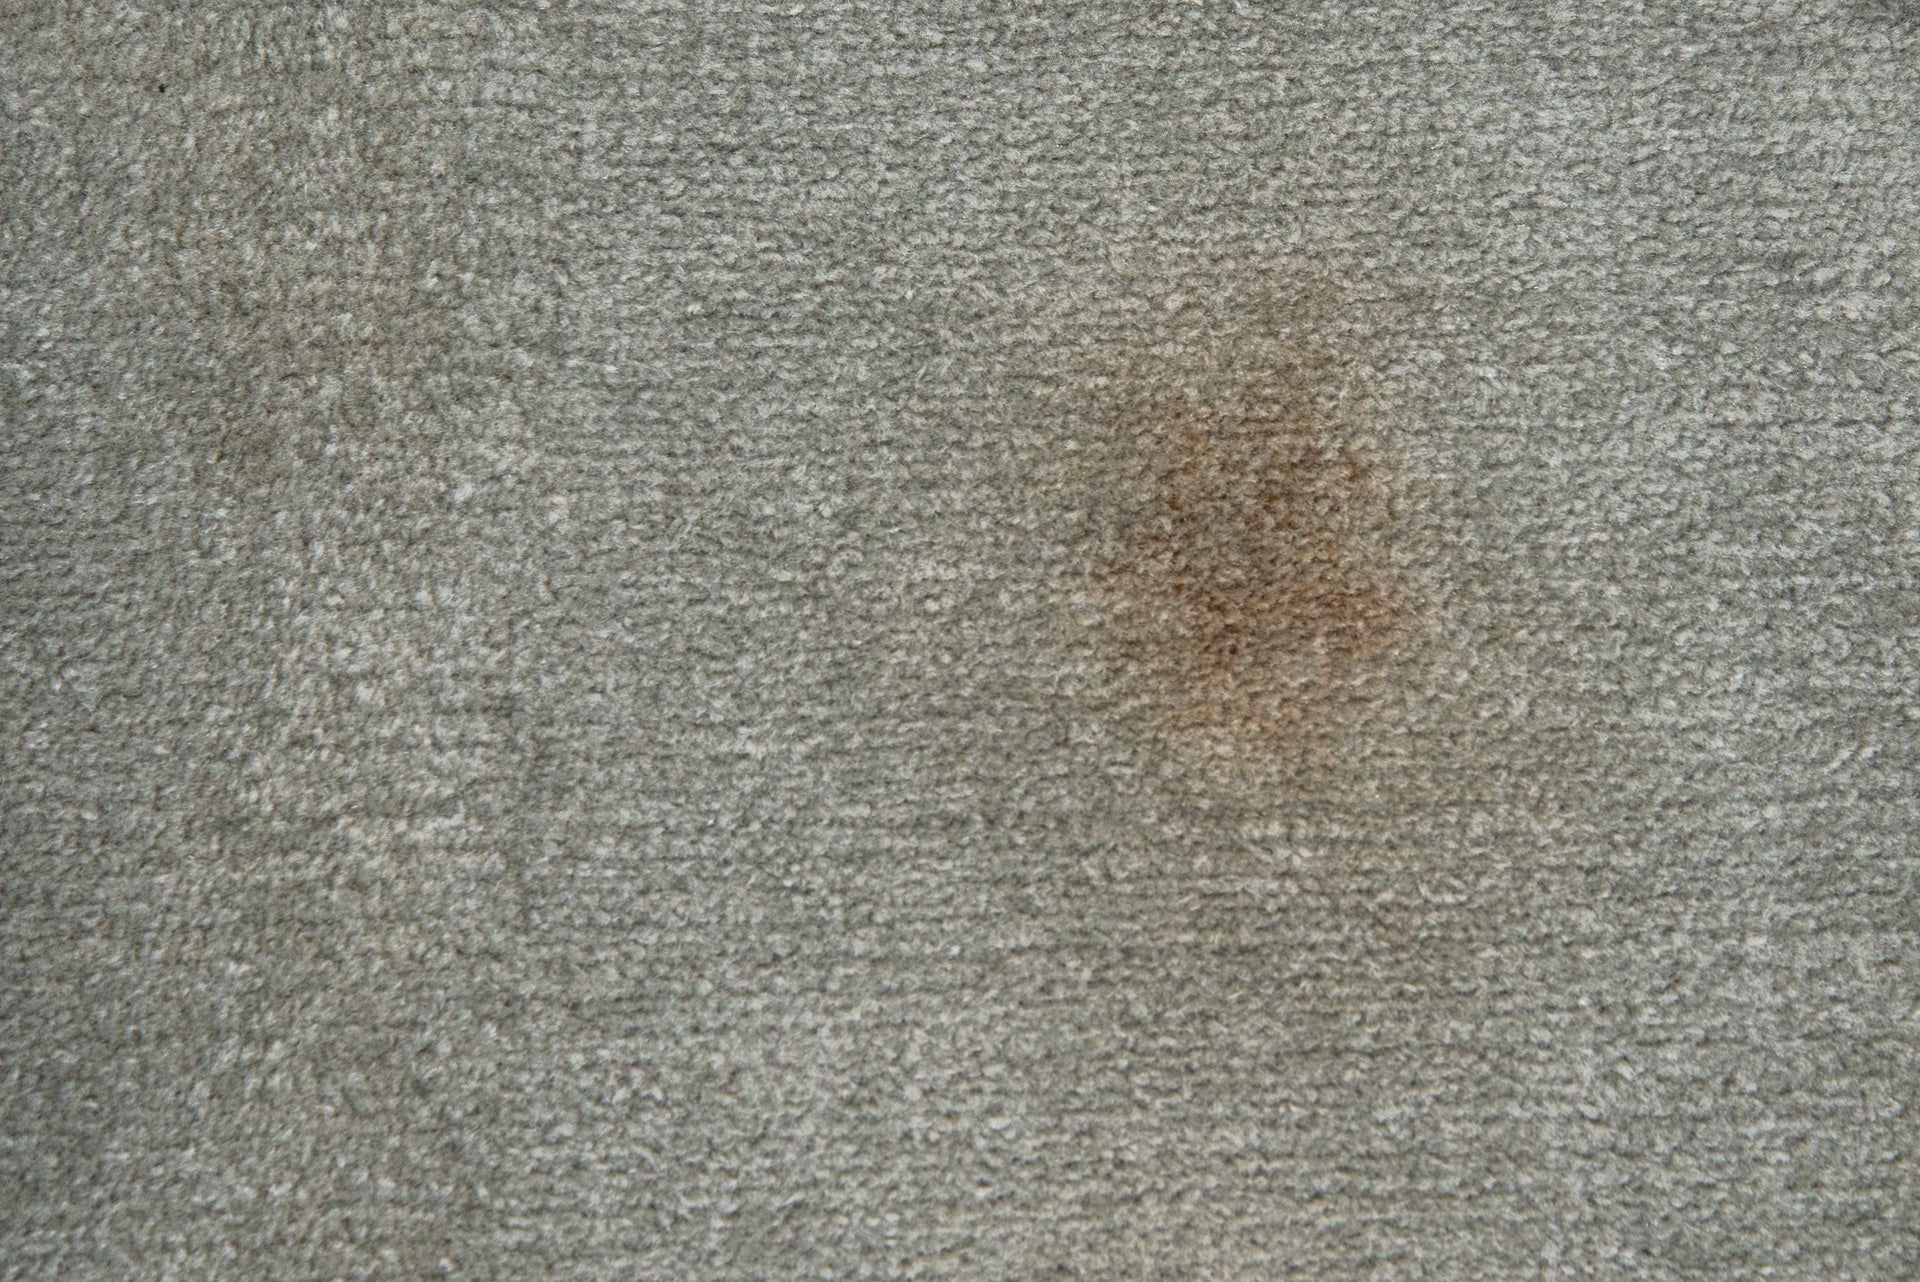 A faint ketchup stain after an initial pass with the Tineco Carpet One Pro